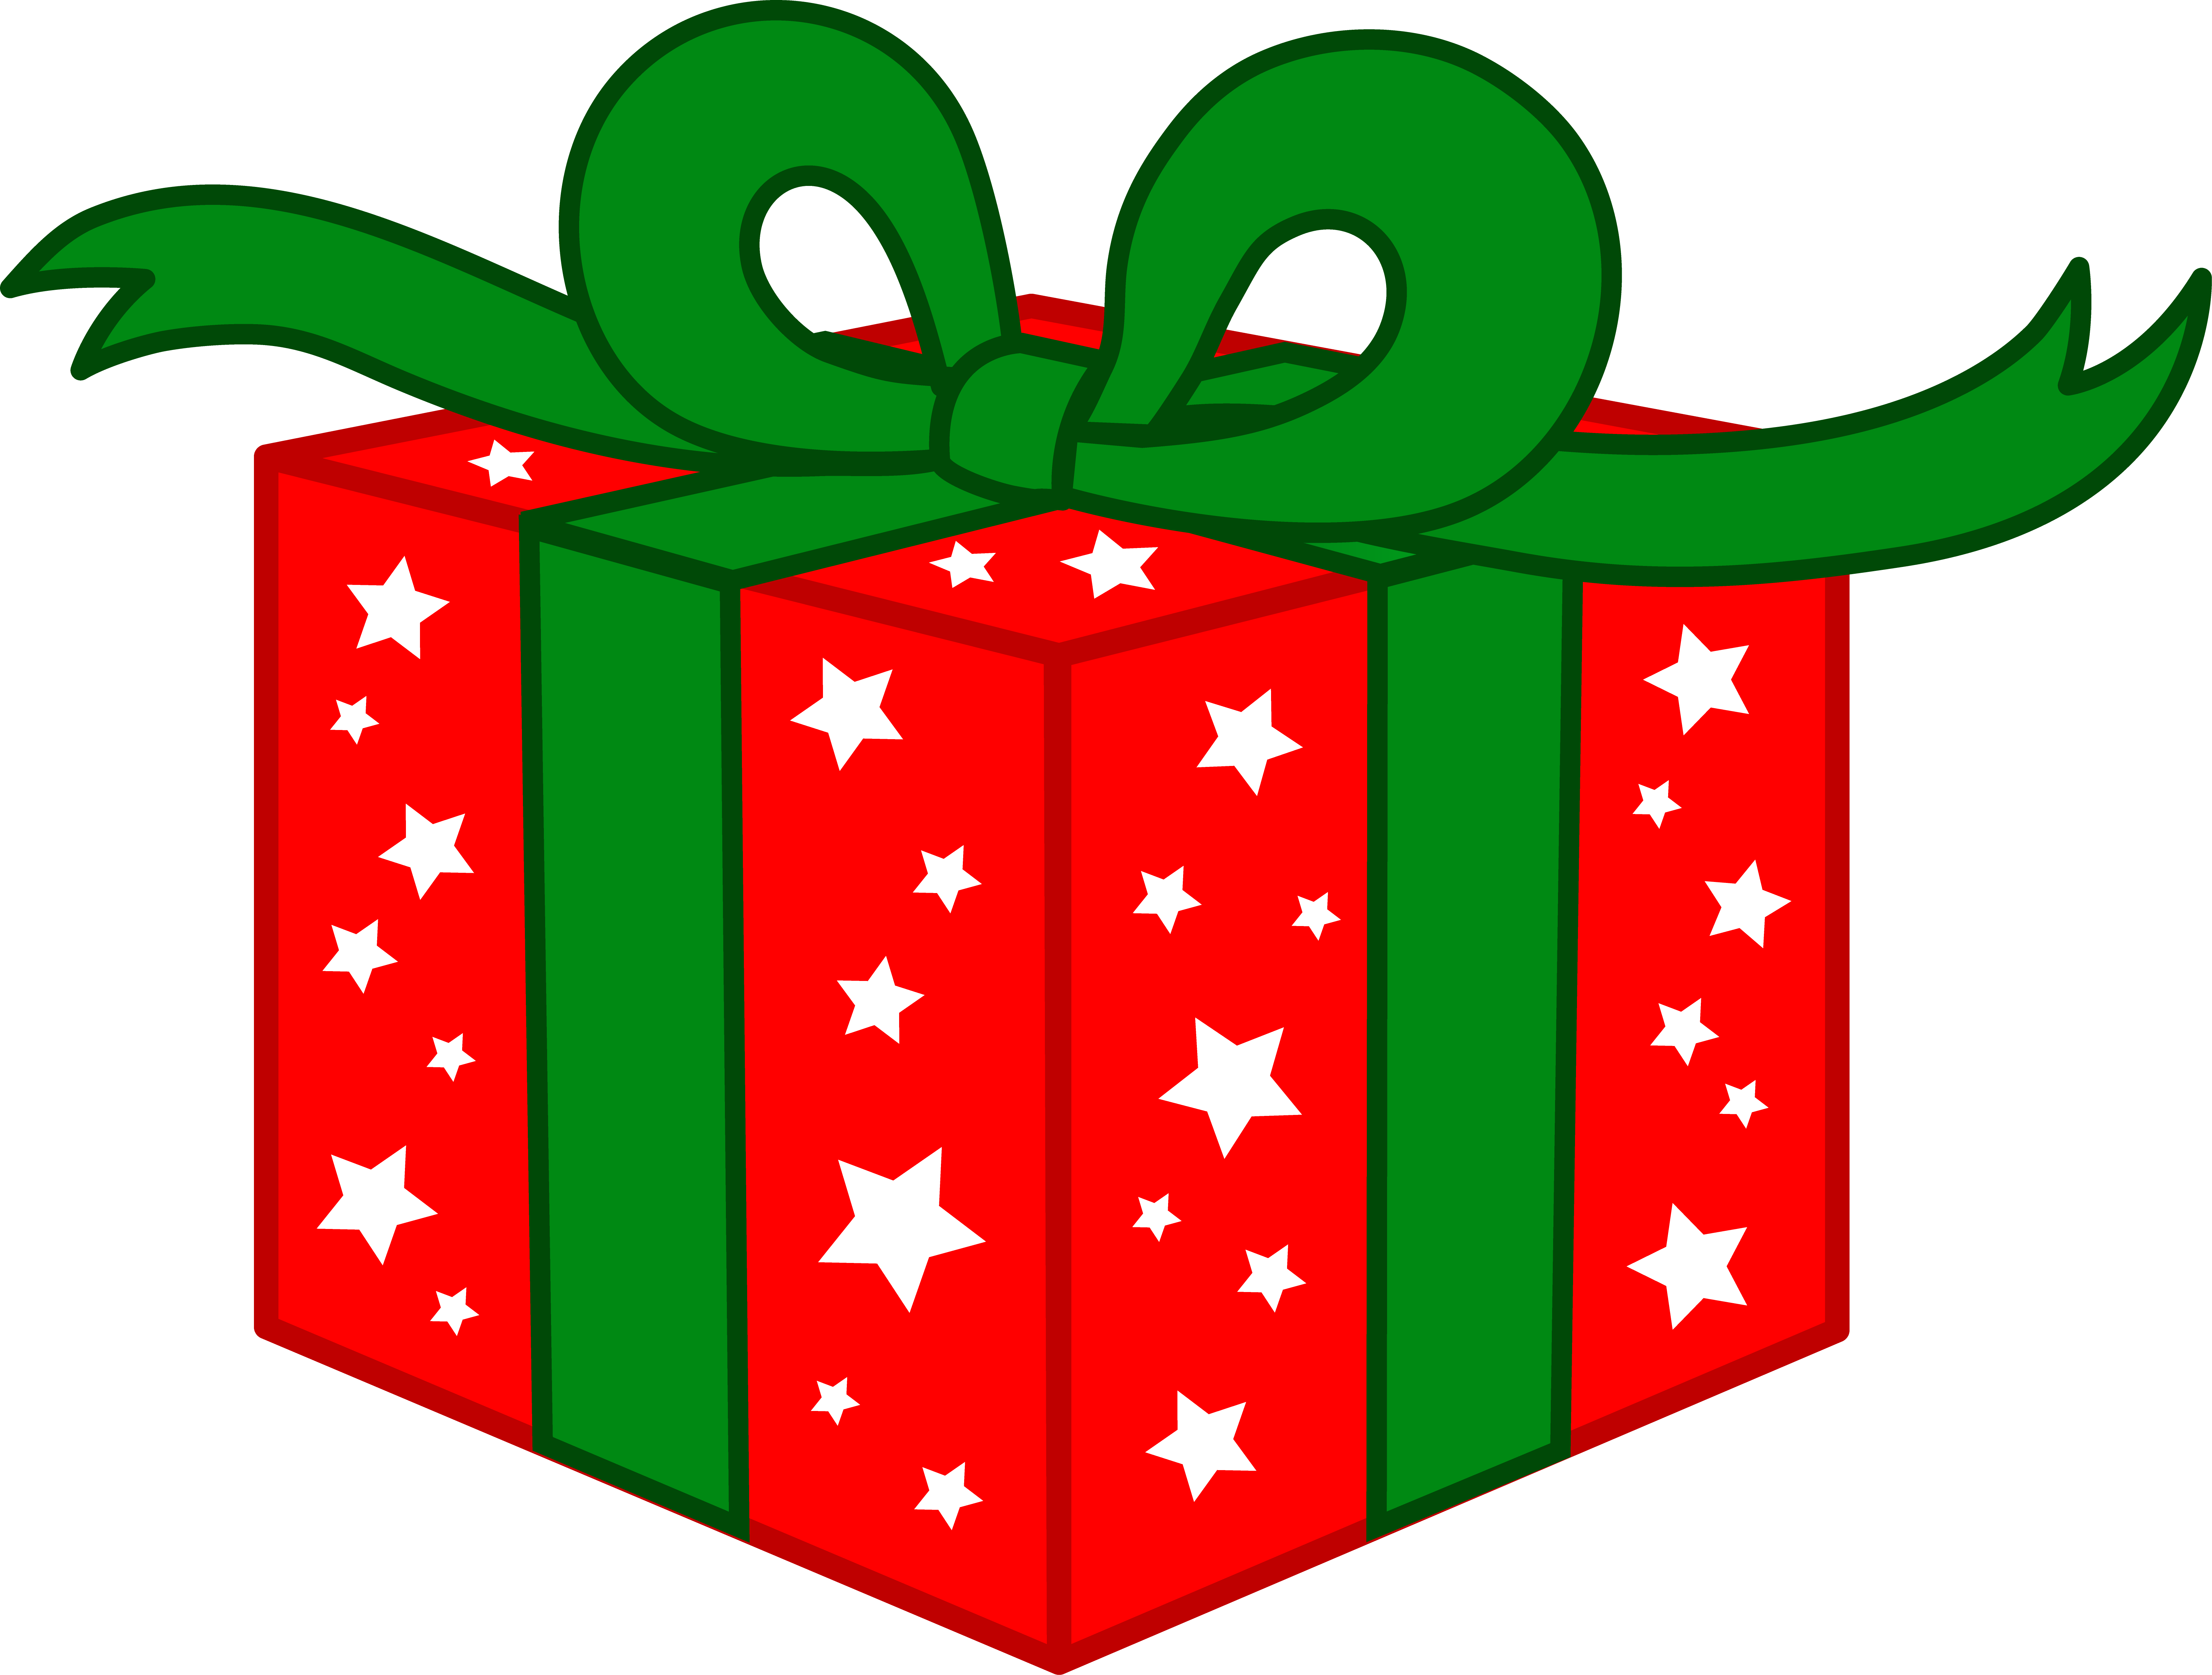 Favorite Sites for Christmas 